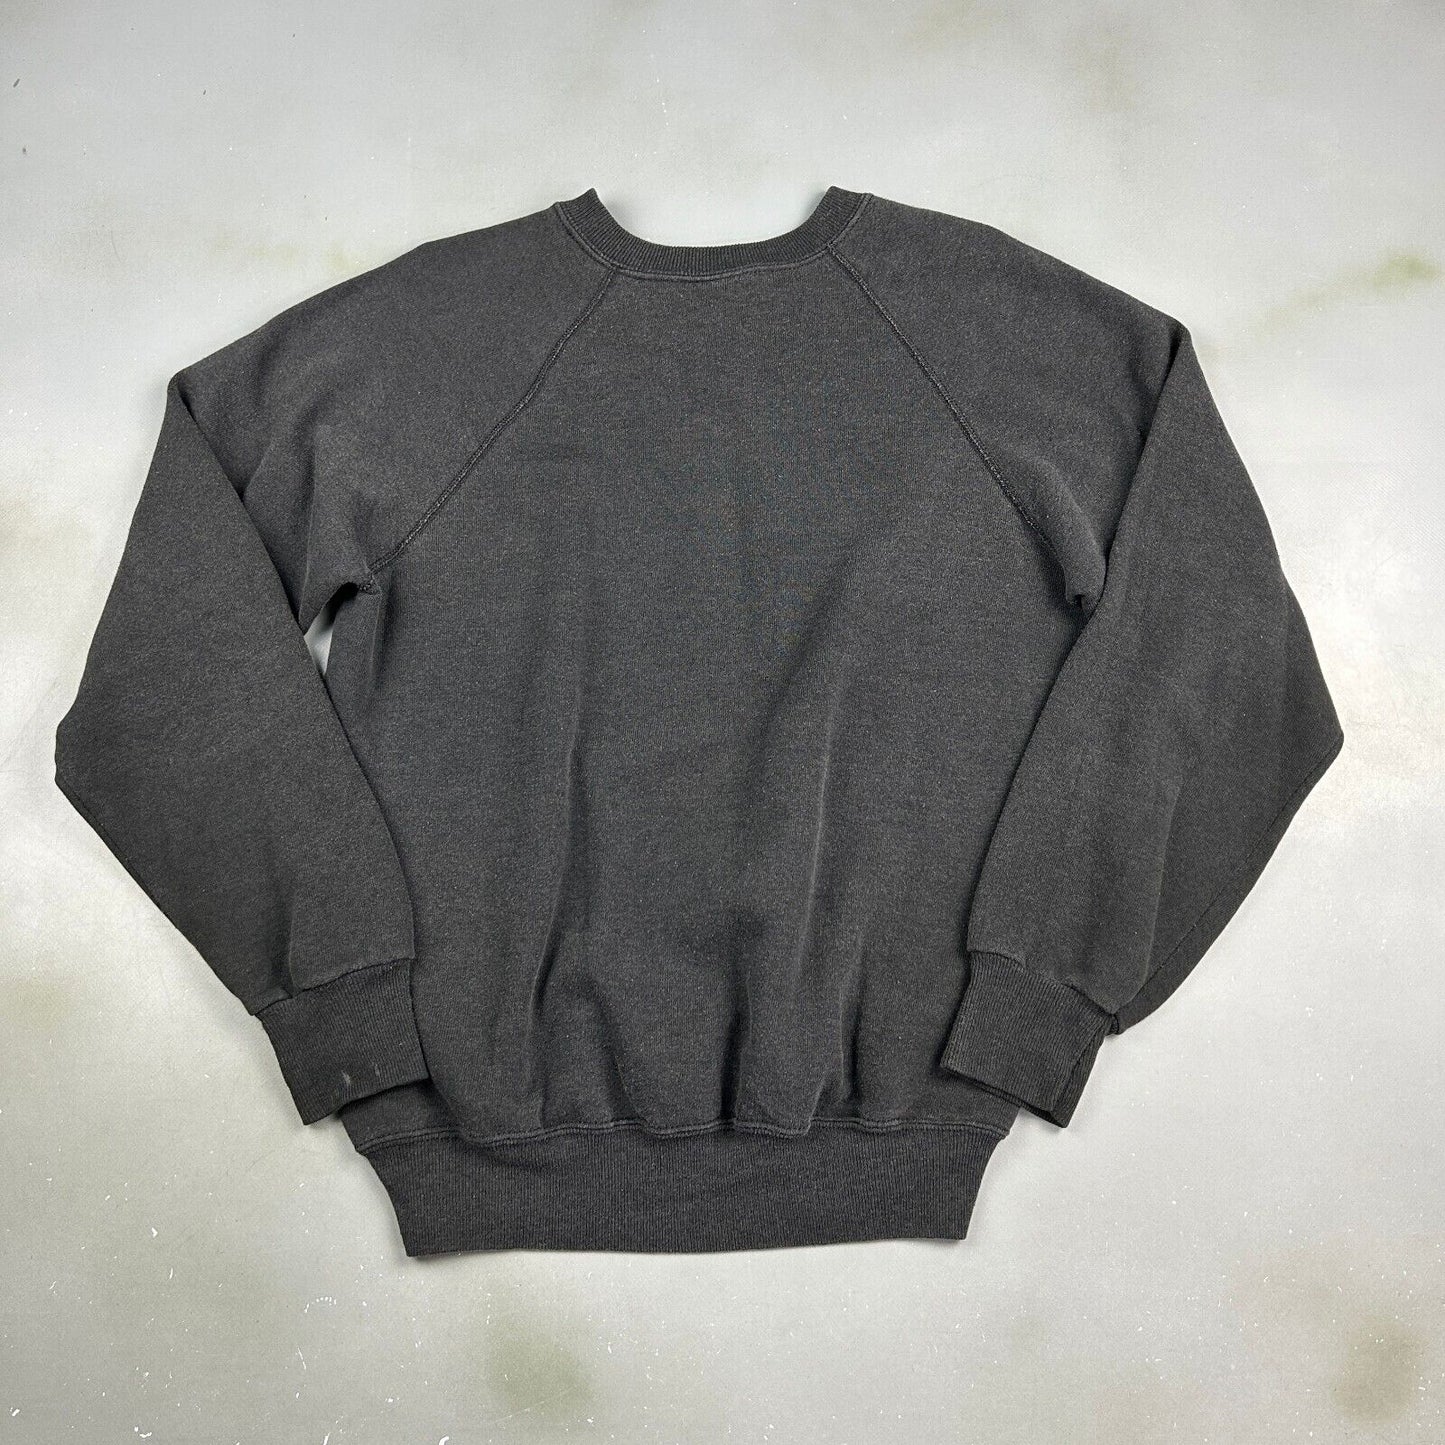 VINTAGE 90s Blank Faded Black Lee Midweight Crewneck Sweater sz Small Adult